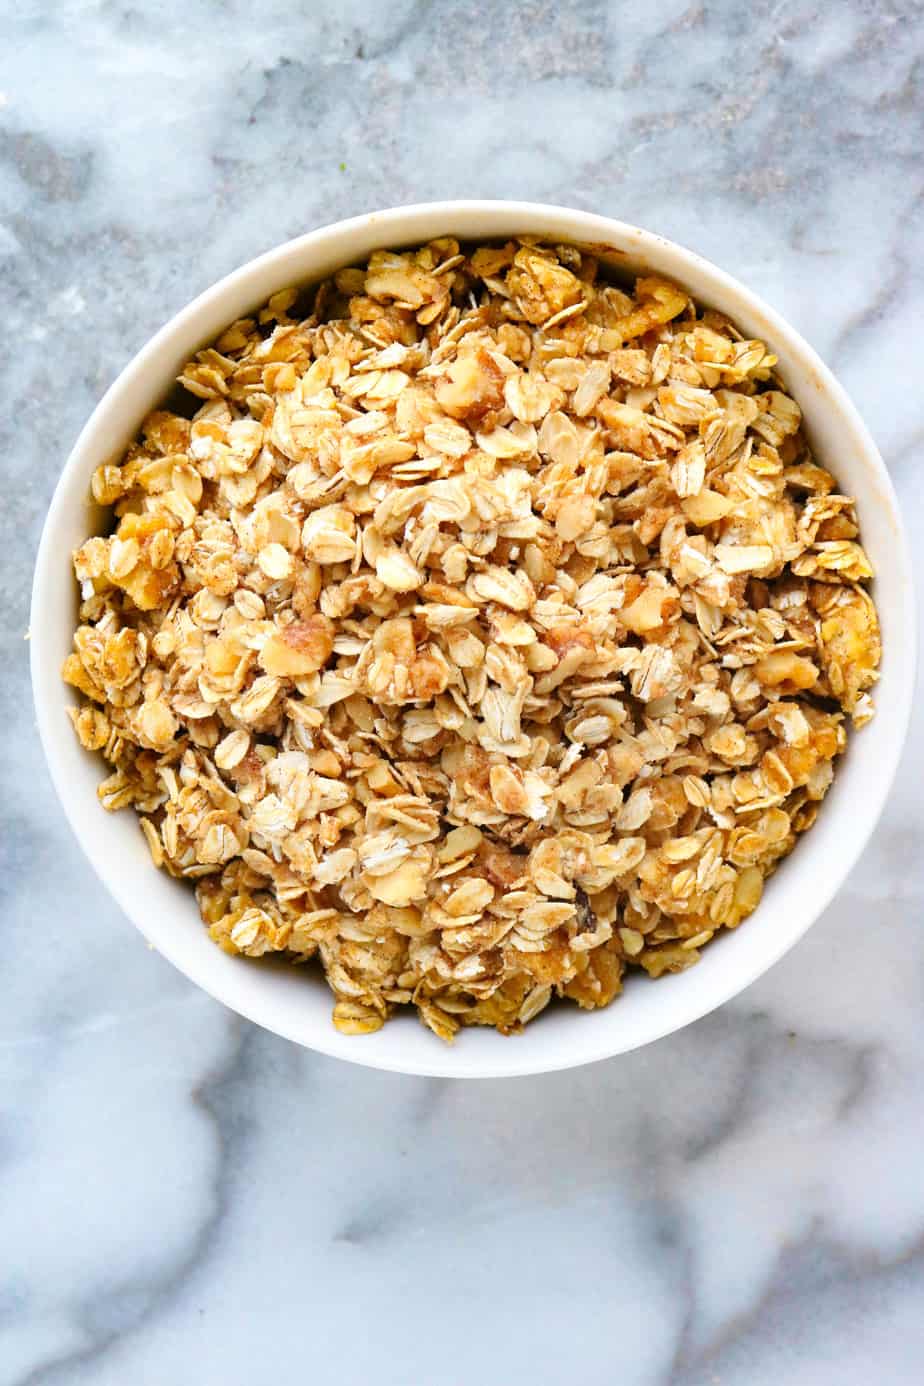 Walnut and oats crumble mix in a white bowl